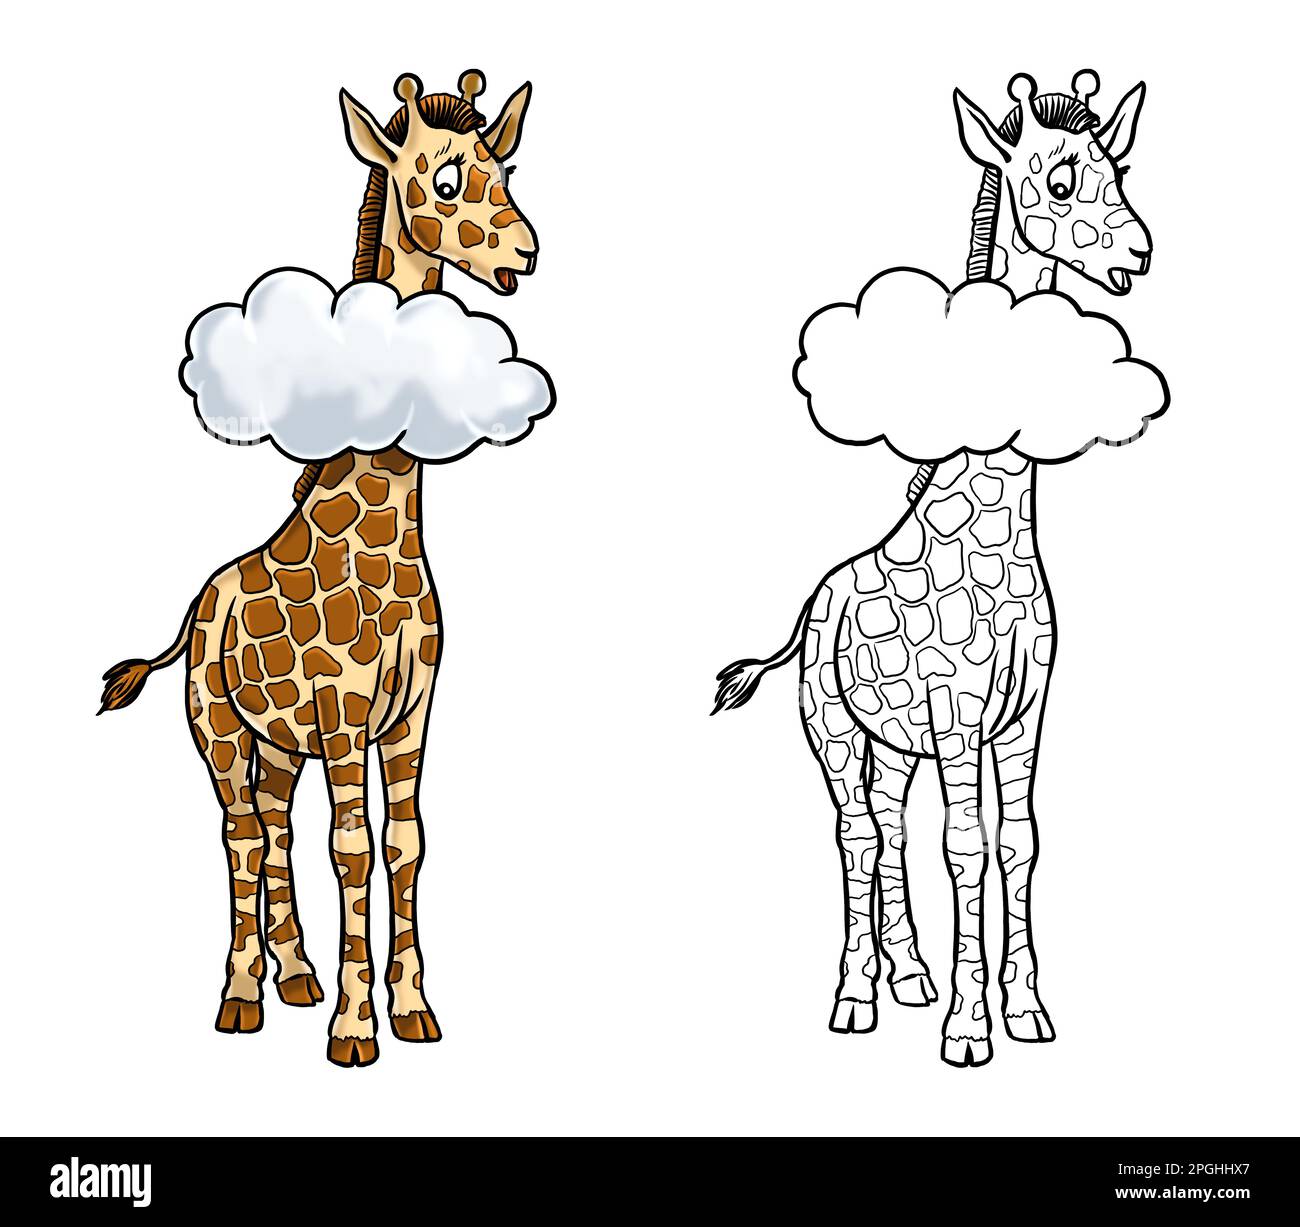 Cute giraffe for coloring. Template for a coloring book with funny animals. Colouring page for kids. Stock Photo